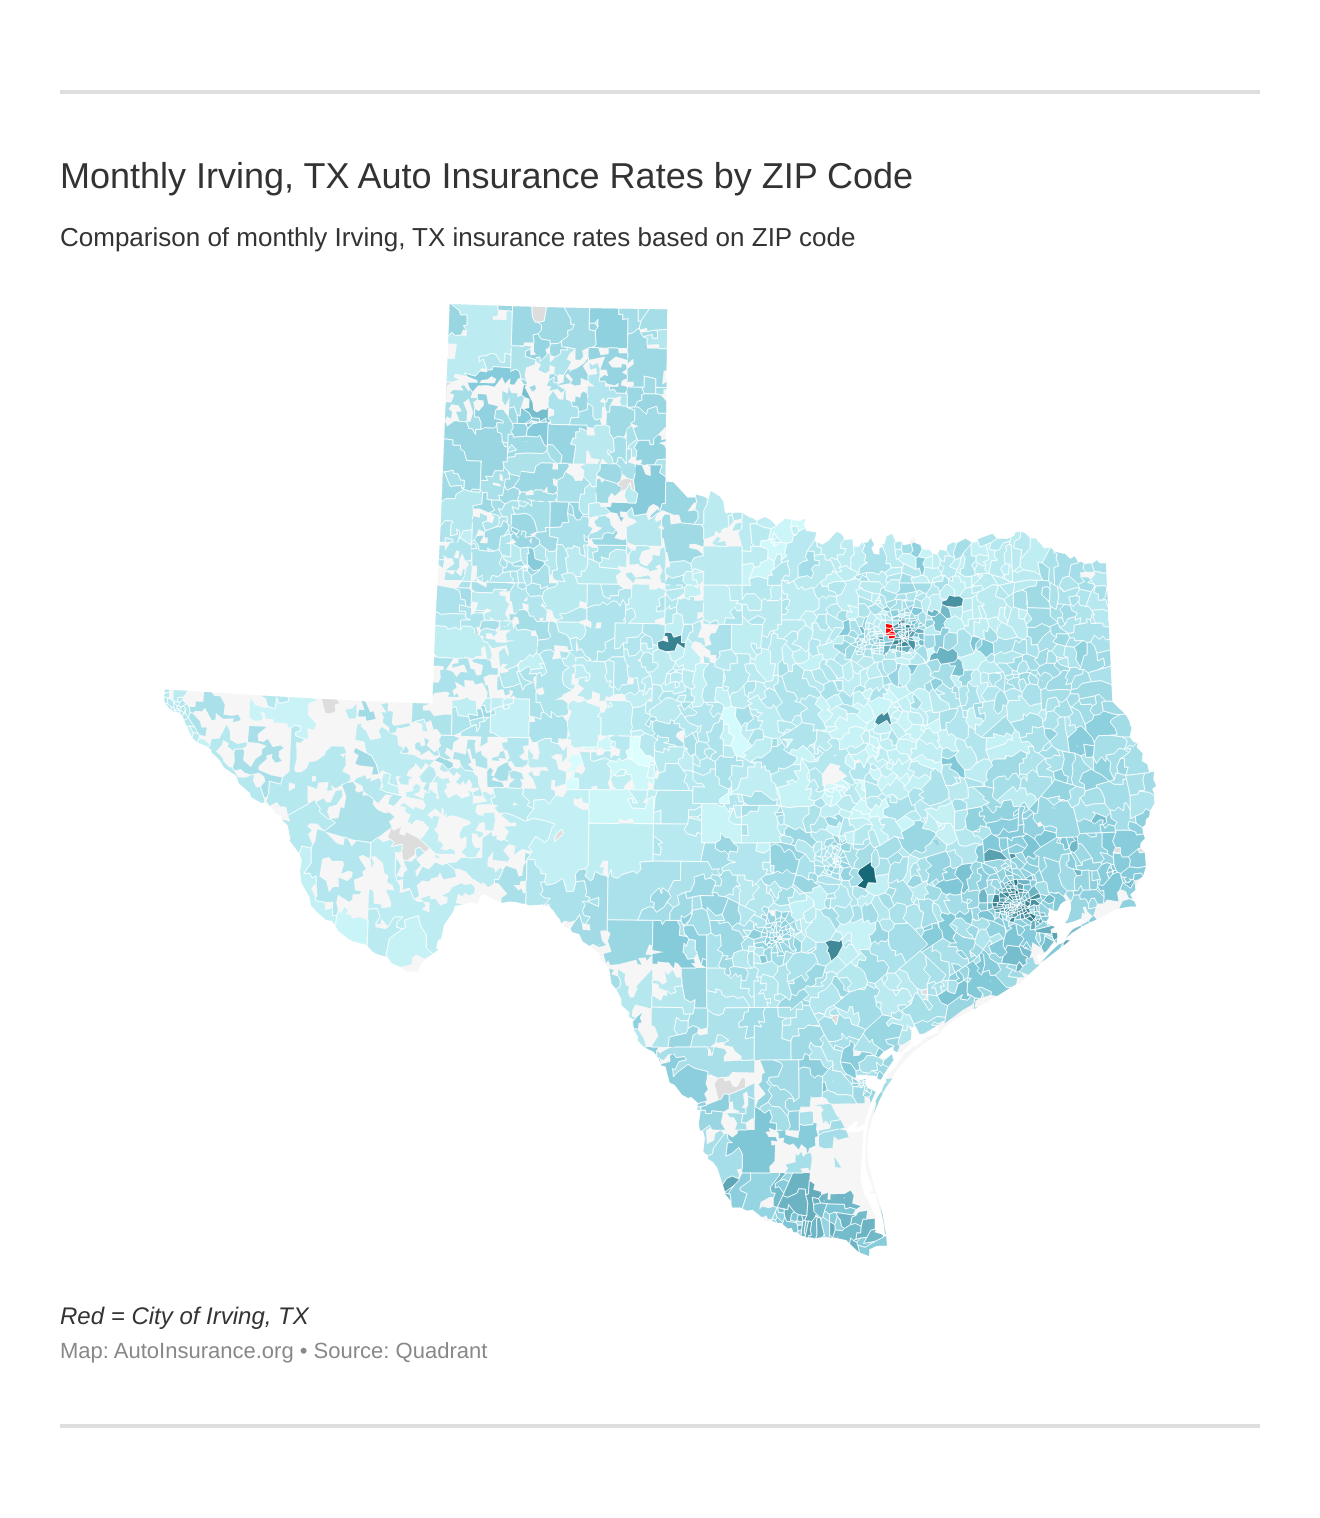 Monthly Irving, TX Auto Insurance Rates by ZIP Code